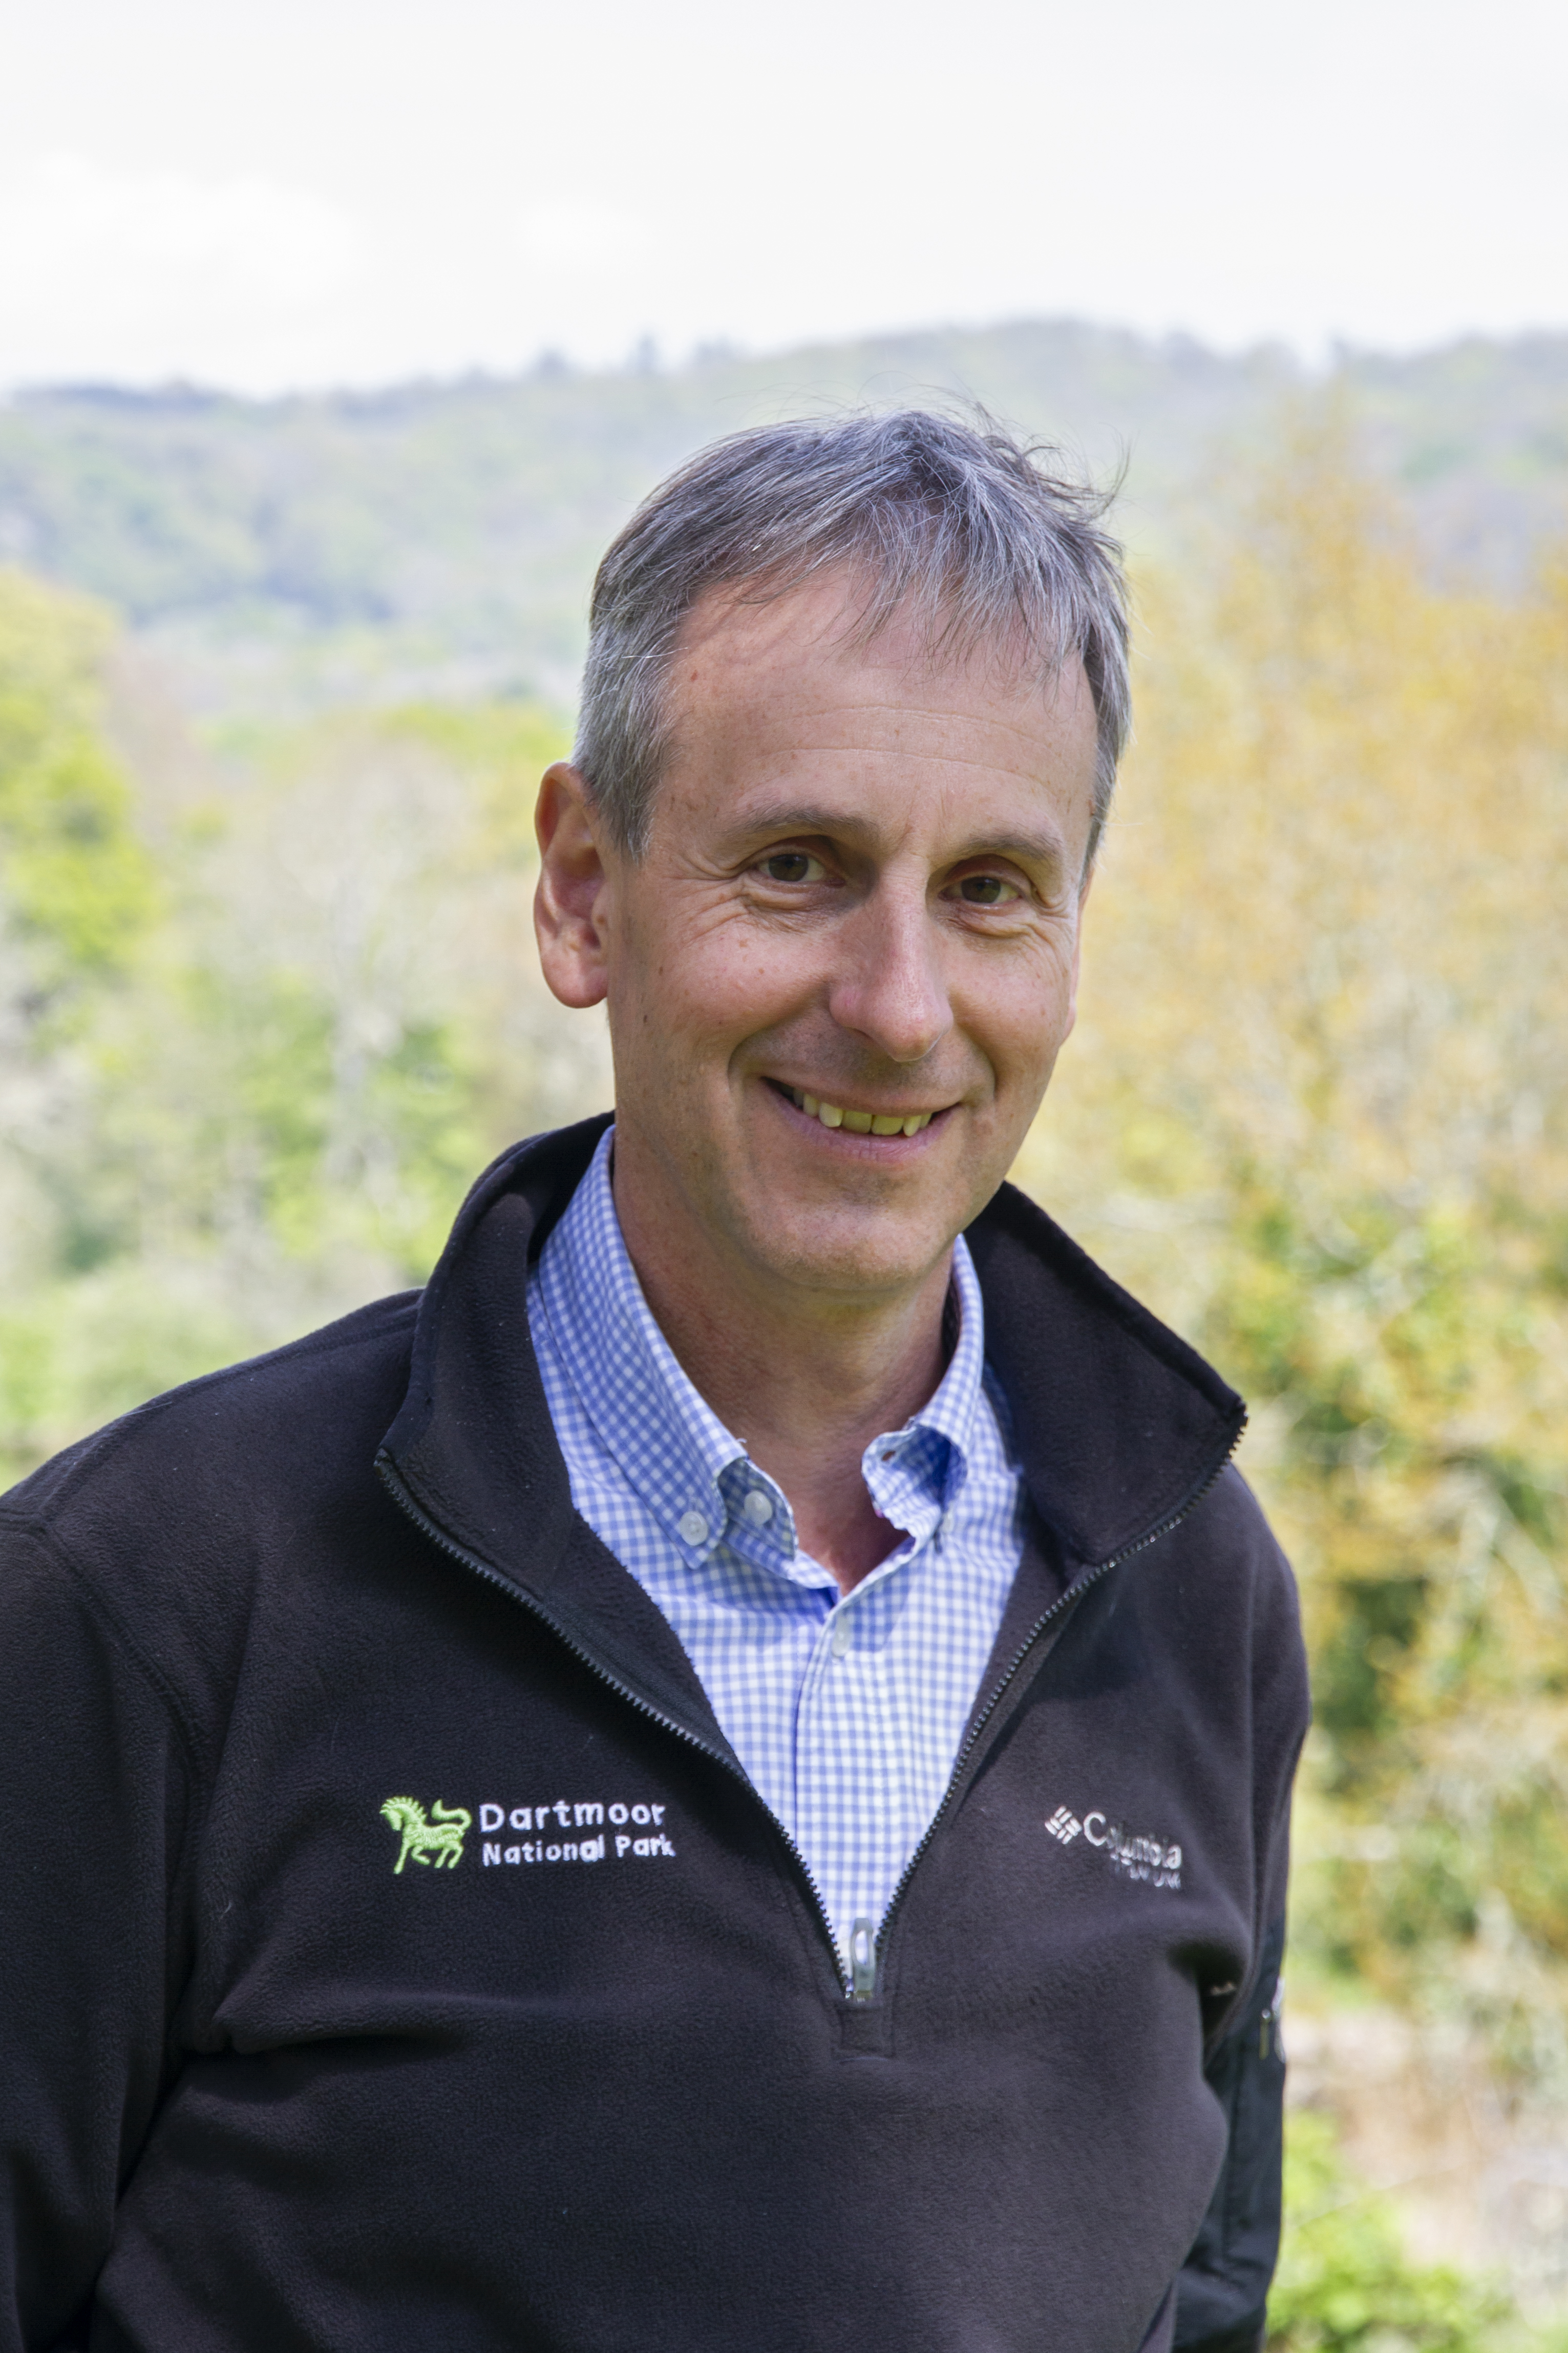 Kevin Bishop Chief executive of Dartmoor National Park, standing in the grounds of Parke